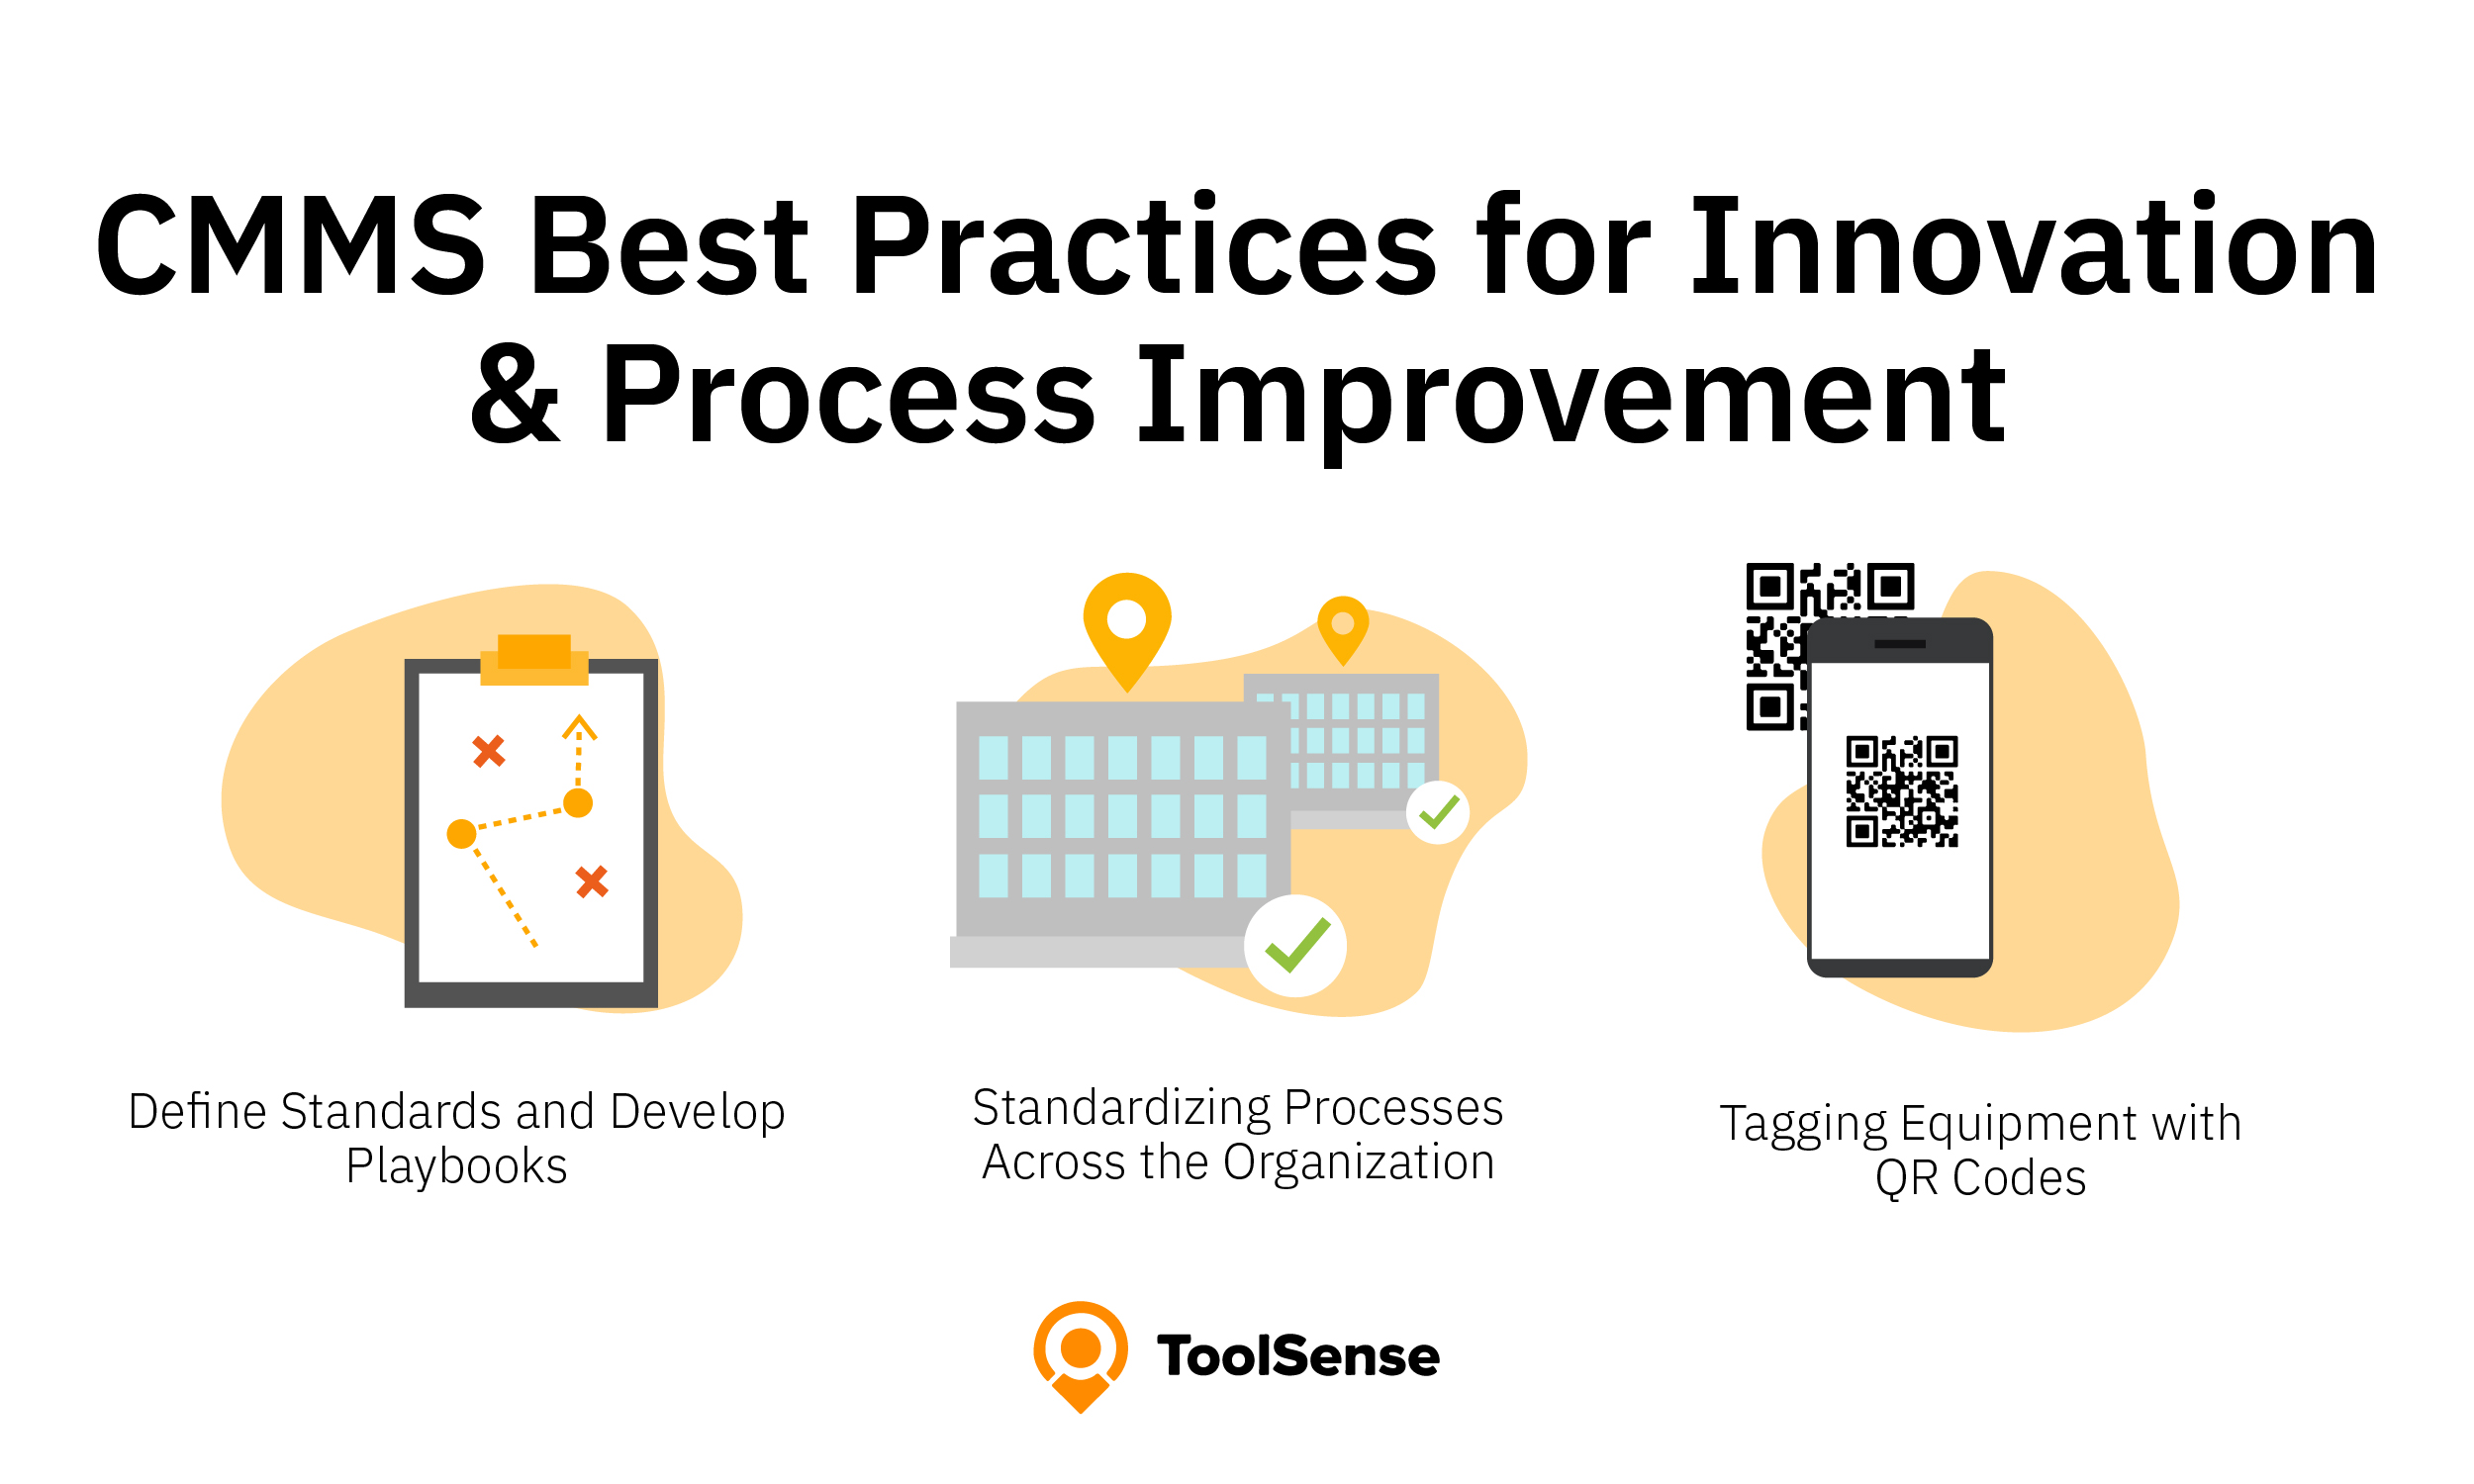 CMMS Best Practices for Innovation and Process Improvement at your maintenance departement